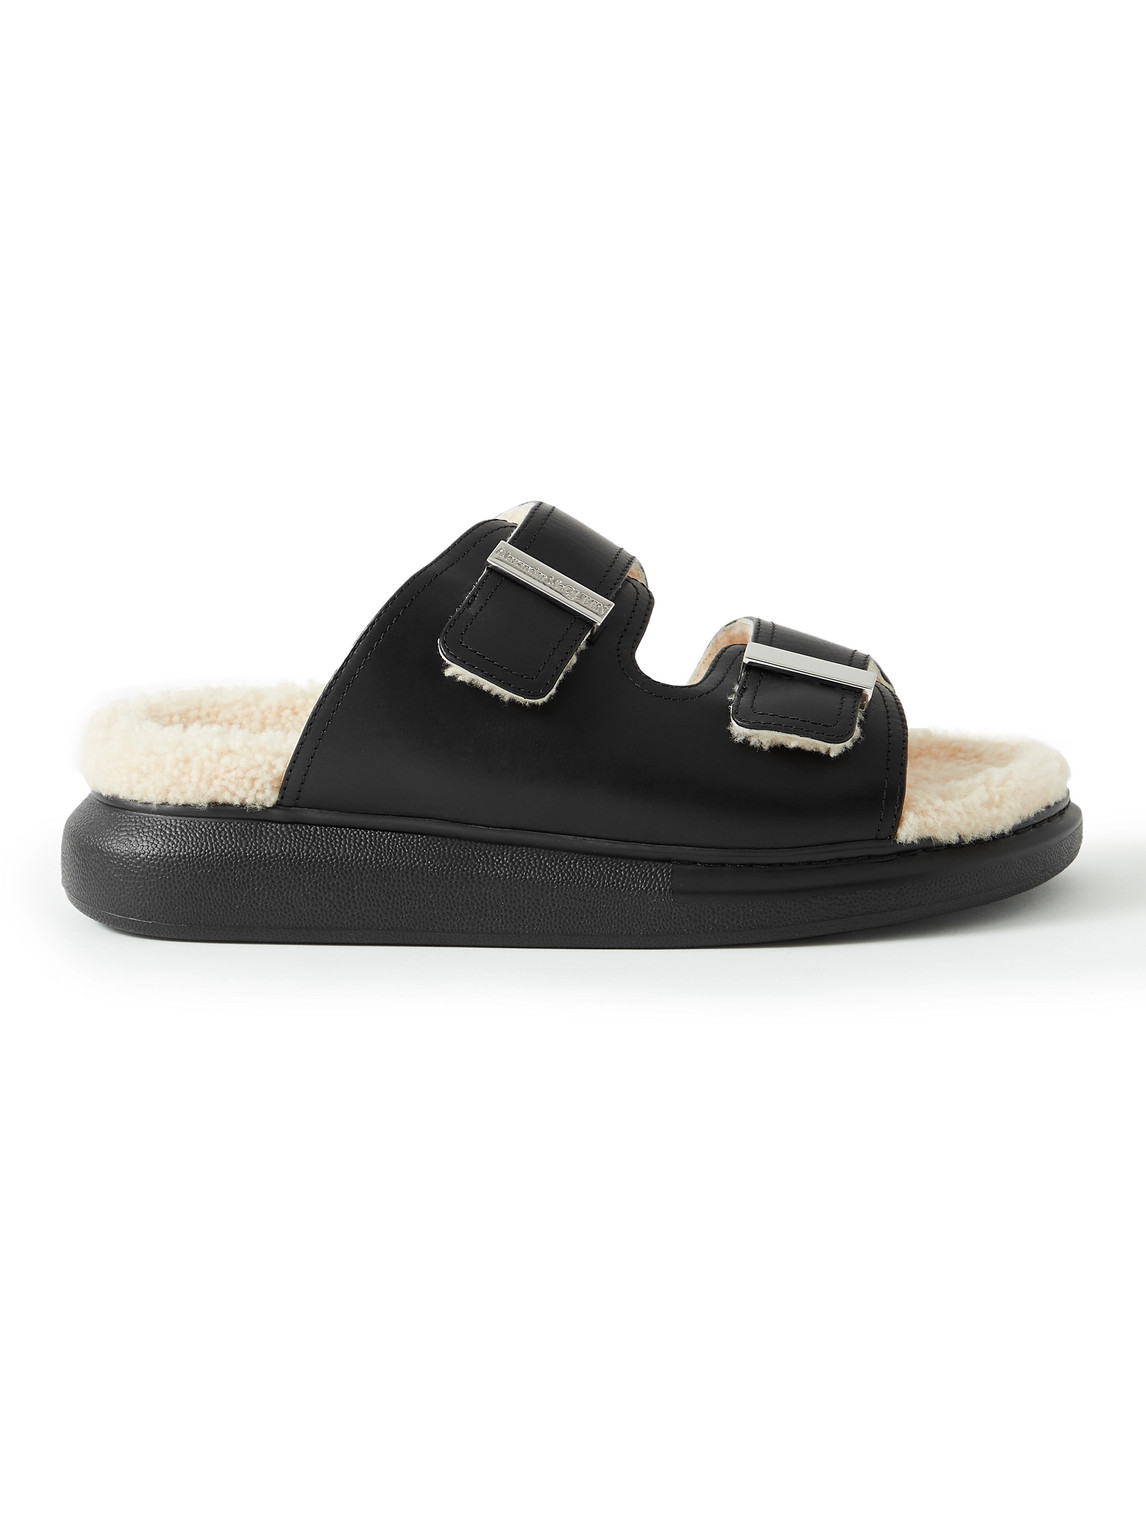 Shearling-Lined Leather Sandals